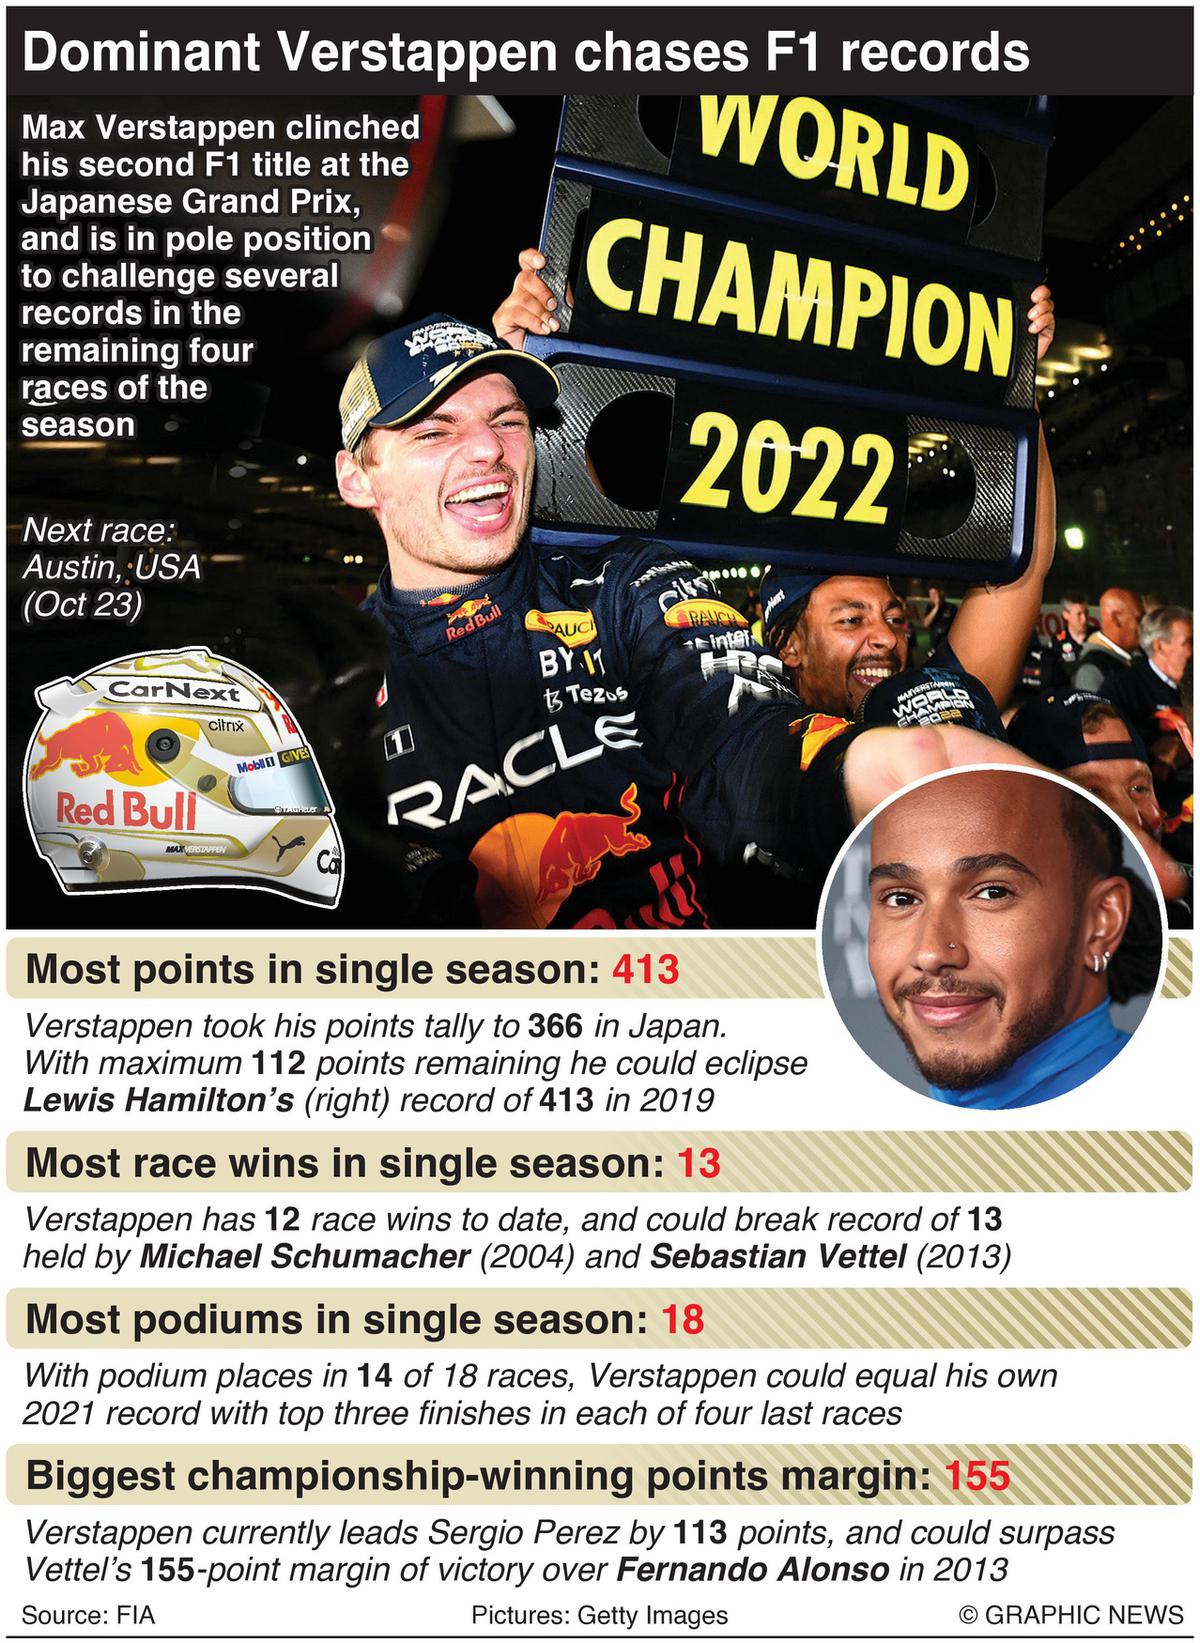 How did Max Verstappen win second world title at Japanese GP